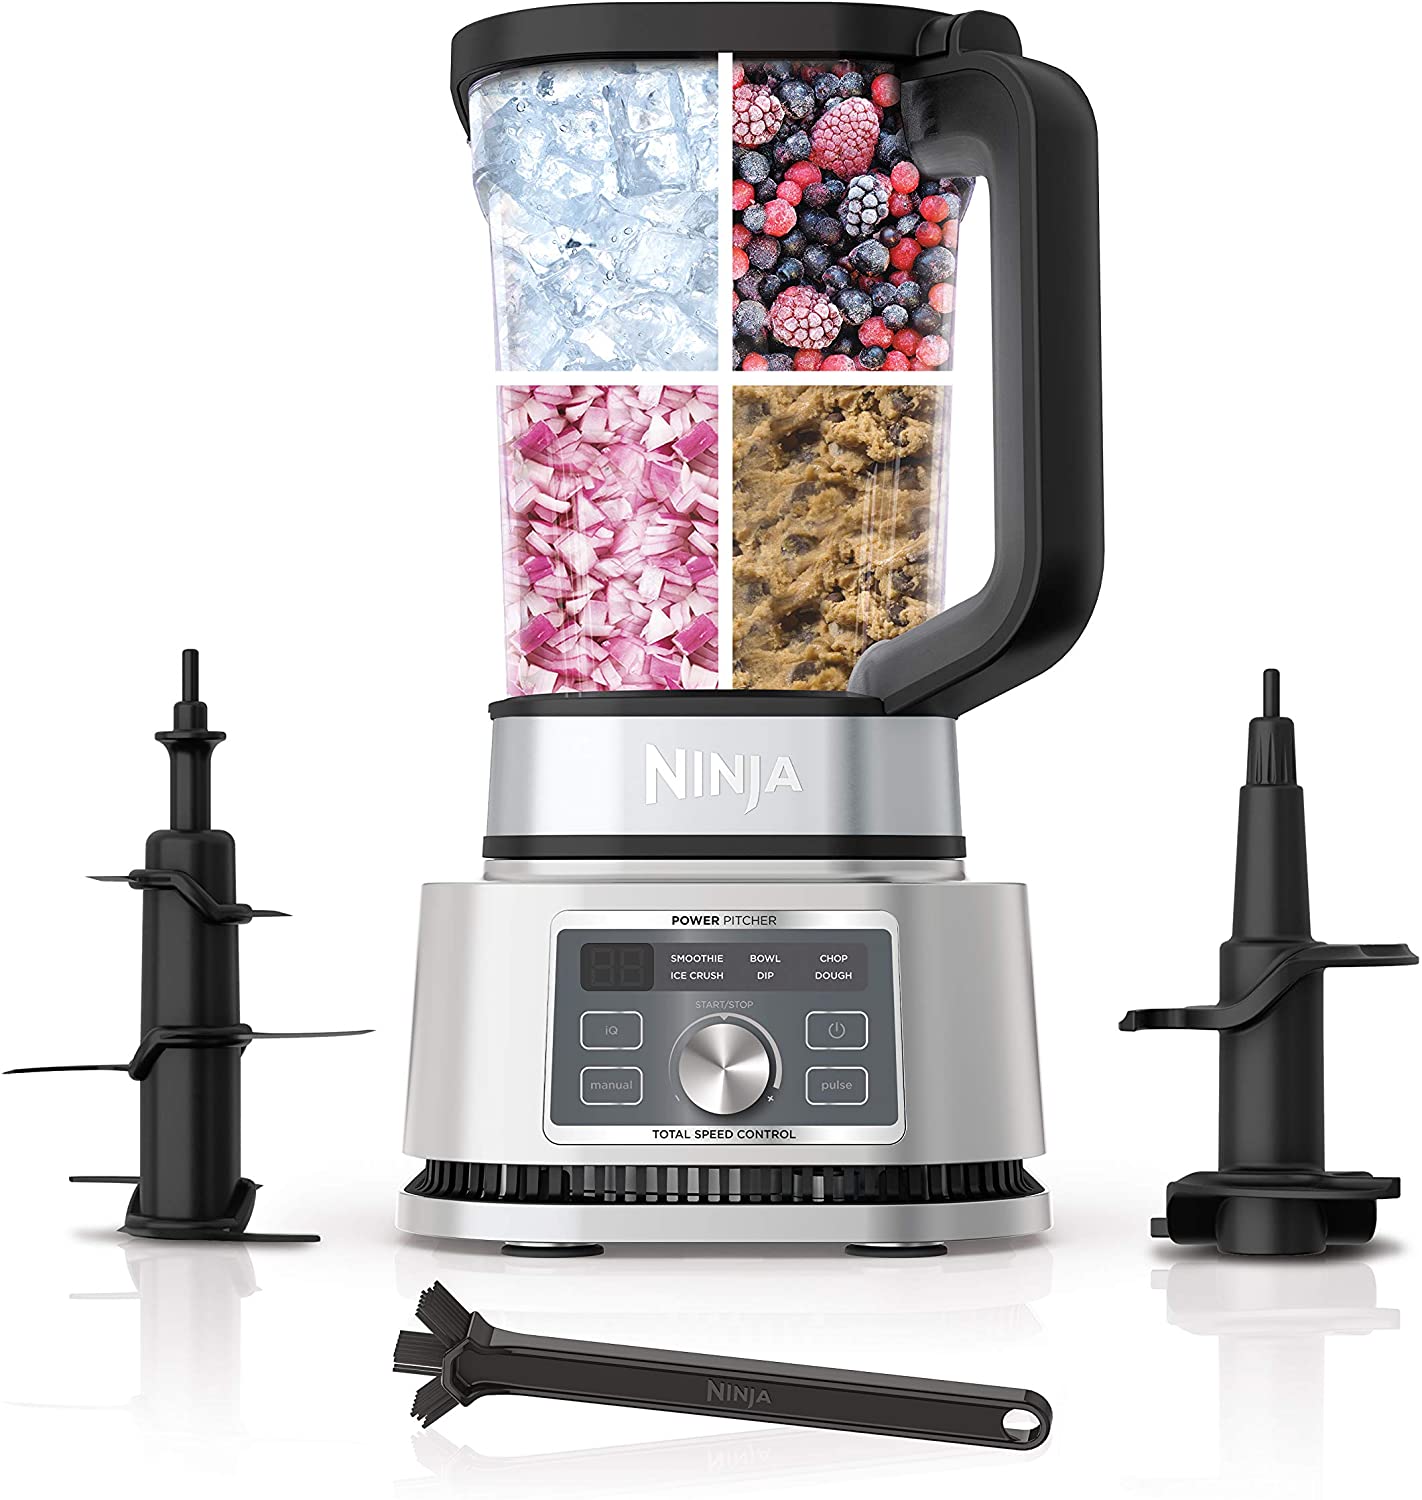 Ninja® Foodi® Smoothie Bowl Maker and Nutrient Extractor* 1200WP 4 Auto-iQ®  - Blenders & Kitchen Systems